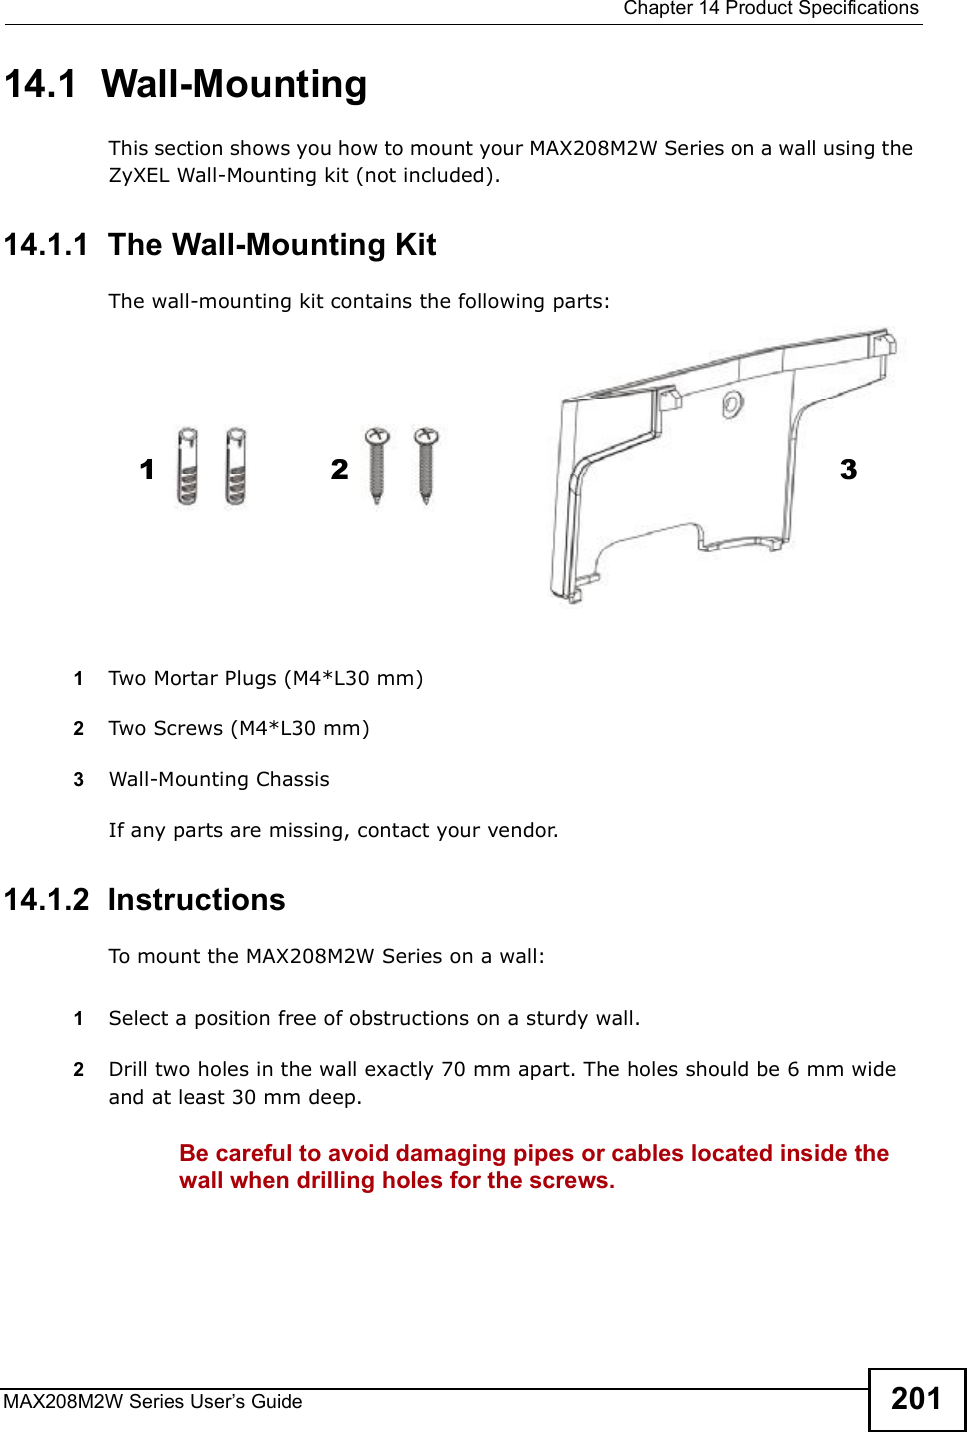  Chapter 14Product SpecificationsMAX208M2W Series User s Guide 20114.1  Wall-MountingThis section shows you how to mount your MAX208M2W Series on a wall using the ZyXEL Wall-Mounting kit (not included).14.1.1  The Wall-Mounting KitThe wall-mounting kit contains the following parts:1Two Mortar Plugs (M4*L30 mm)2Two Screws (M4*L30 mm)3Wall-Mounting ChassisIf any parts are missing, contact your vendor.14.1.2  InstructionsTo mount the MAX208M2W Series on a wall:1Select a position free of obstructions on a sturdy wall. 2Drill two holes in the wall exactly 70 mm apart. The holes should be 6 mm wide and at least 30 mm deep.Be careful to avoid damaging pipes or cables located inside the wall when drilling holes for the screws.123